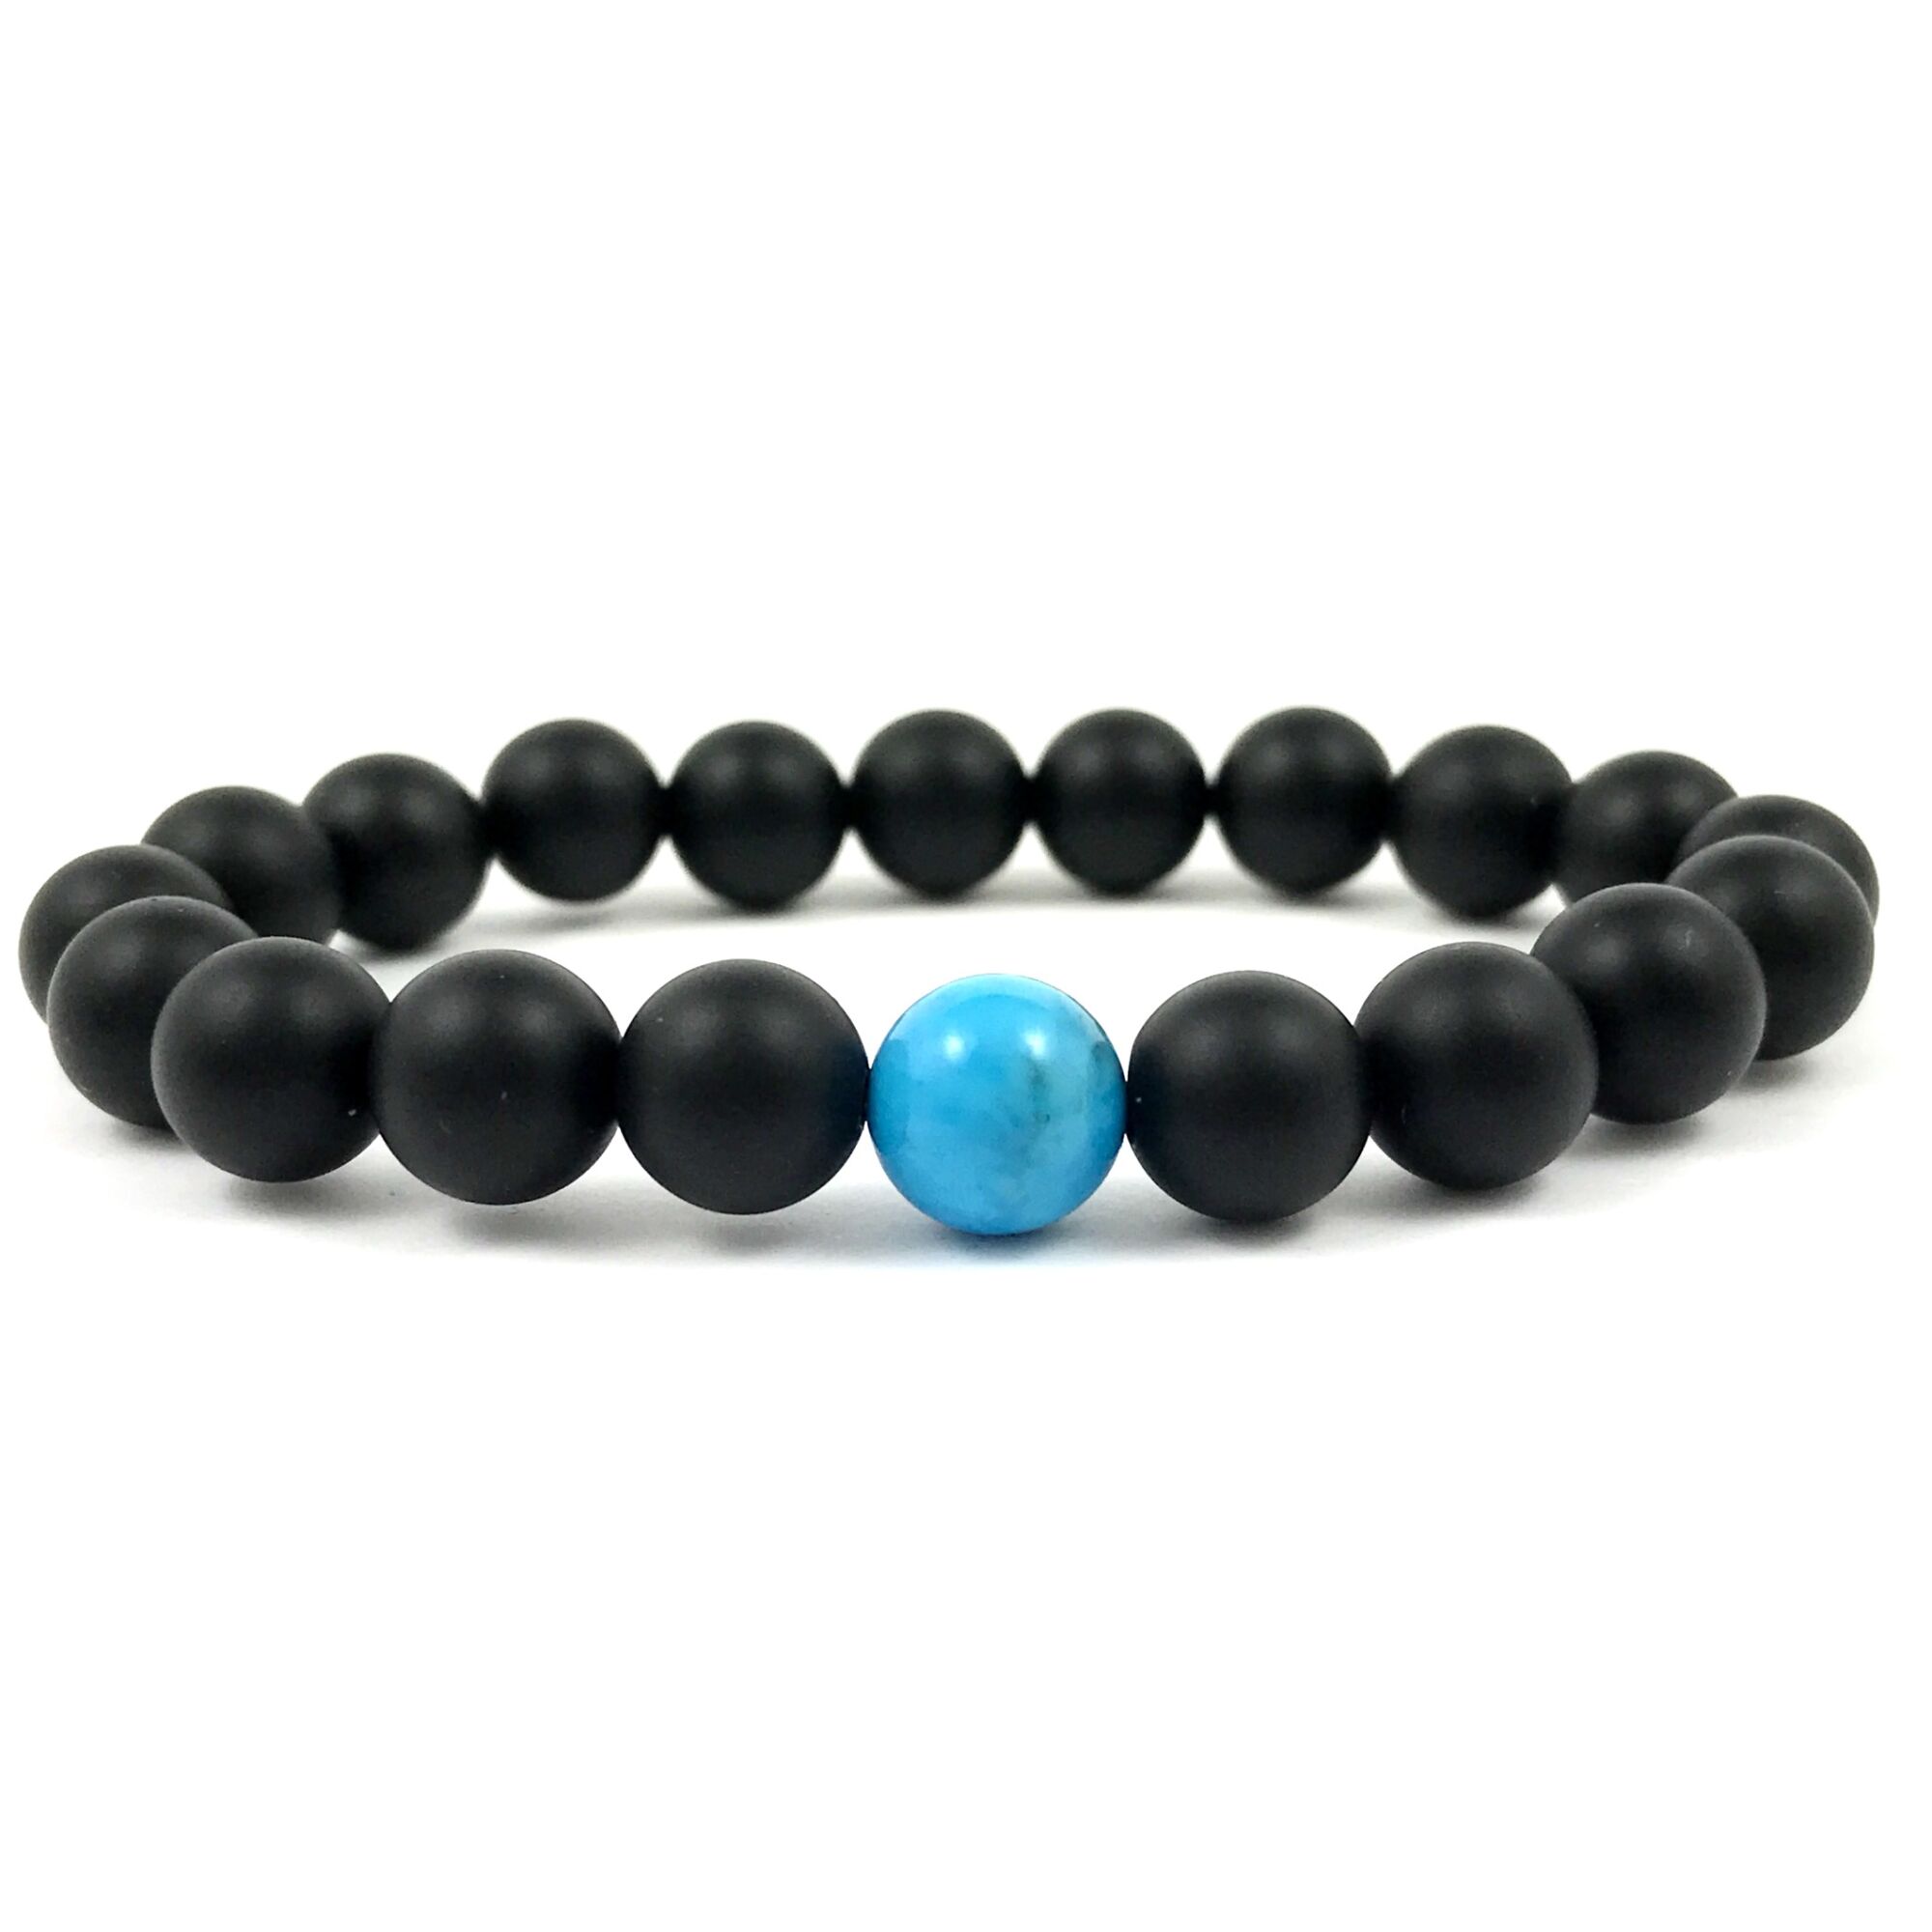 Matte onyx and turquoise fleck pearl bracelet